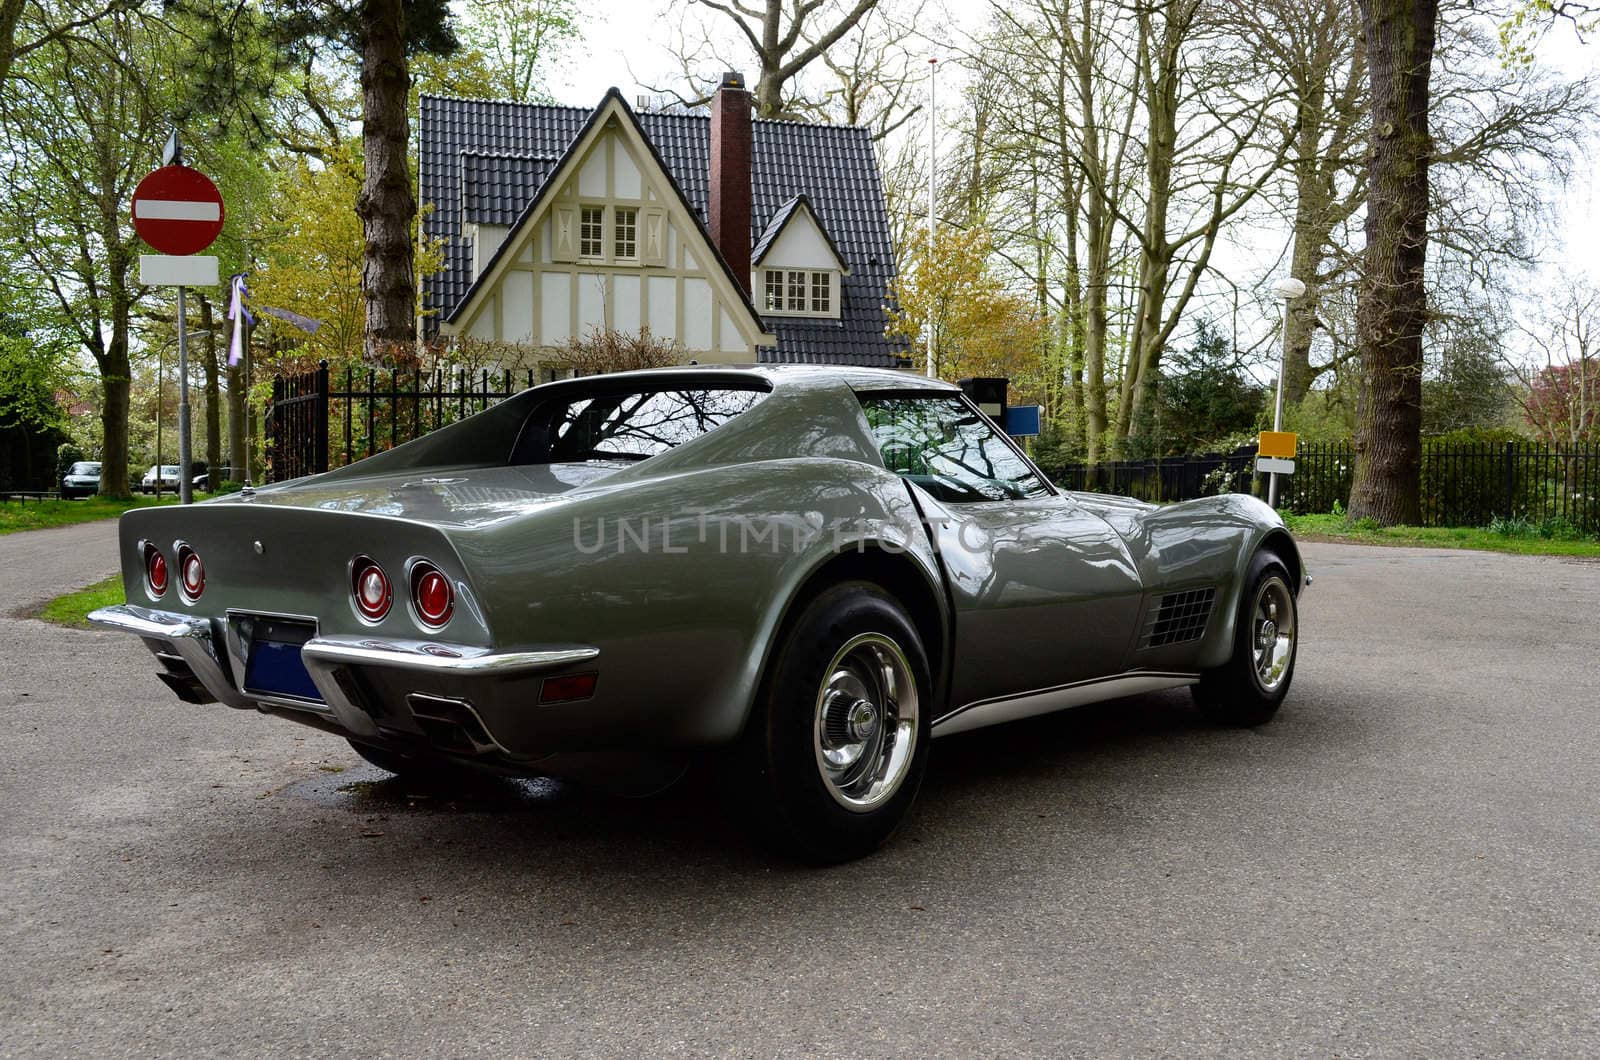 Iconic sportscar Chevrolet Corvette C3 Stingray in silver-grey in front of a luxury house.